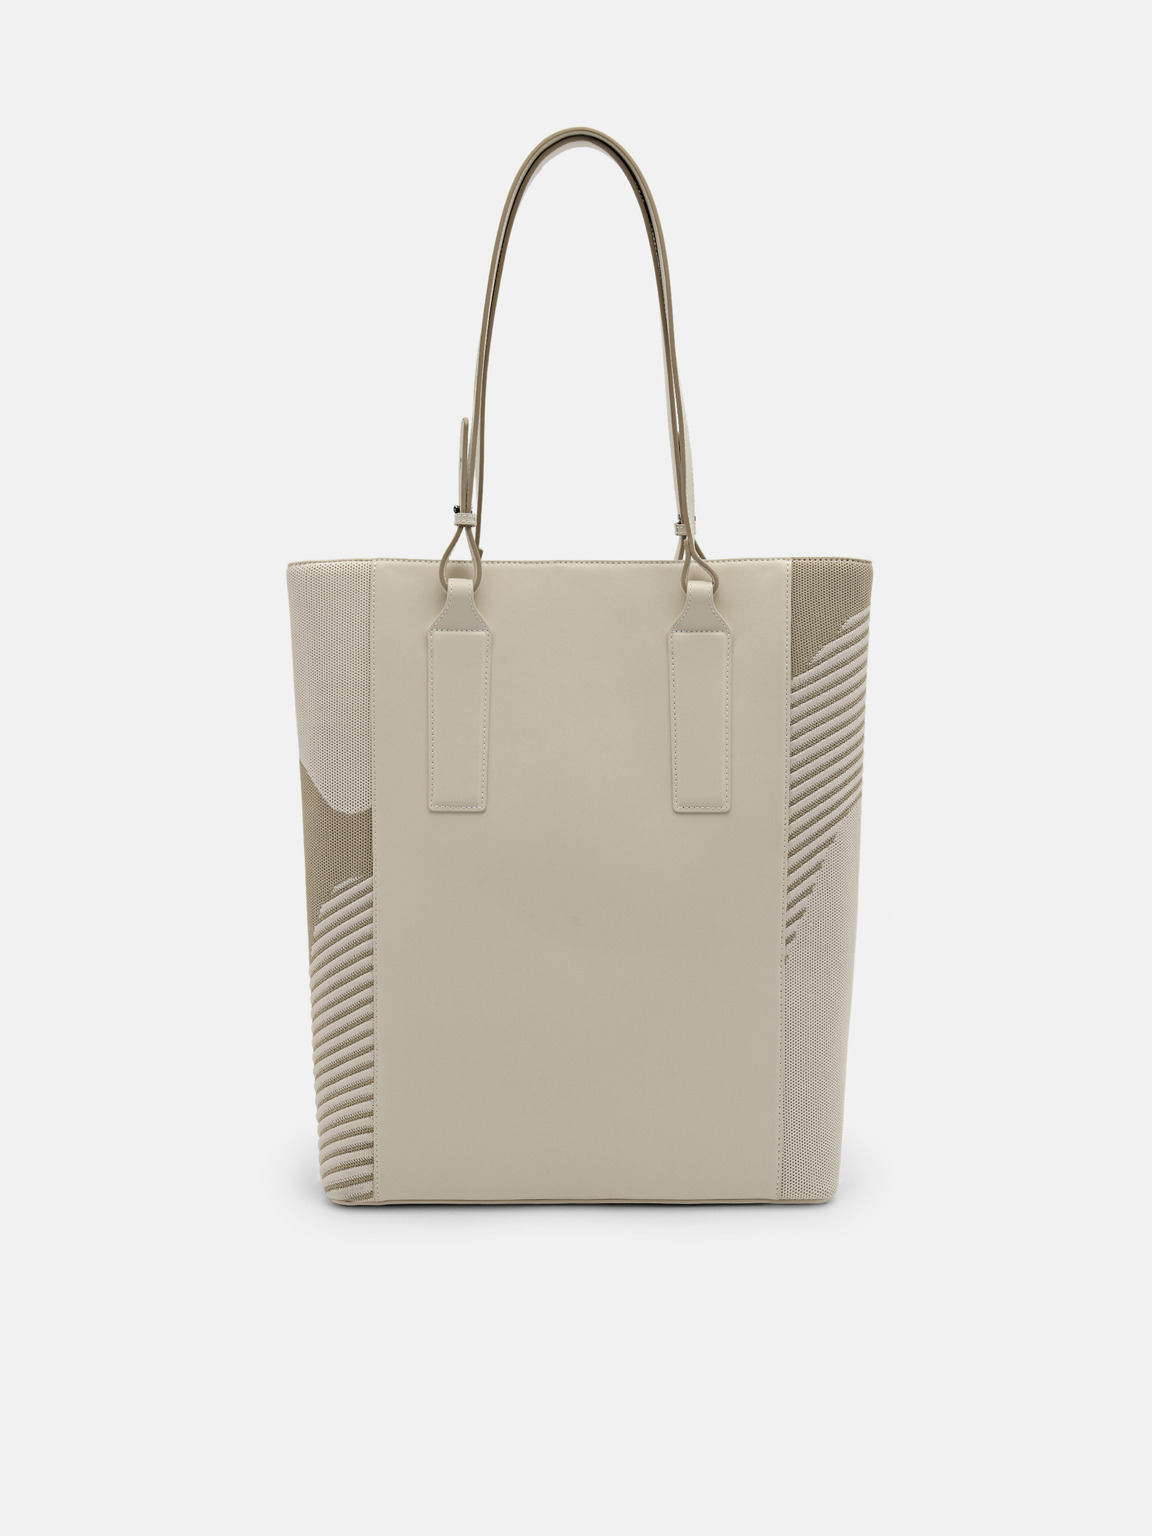 rePEDRO Recycled Leather Tote Bag, Sand